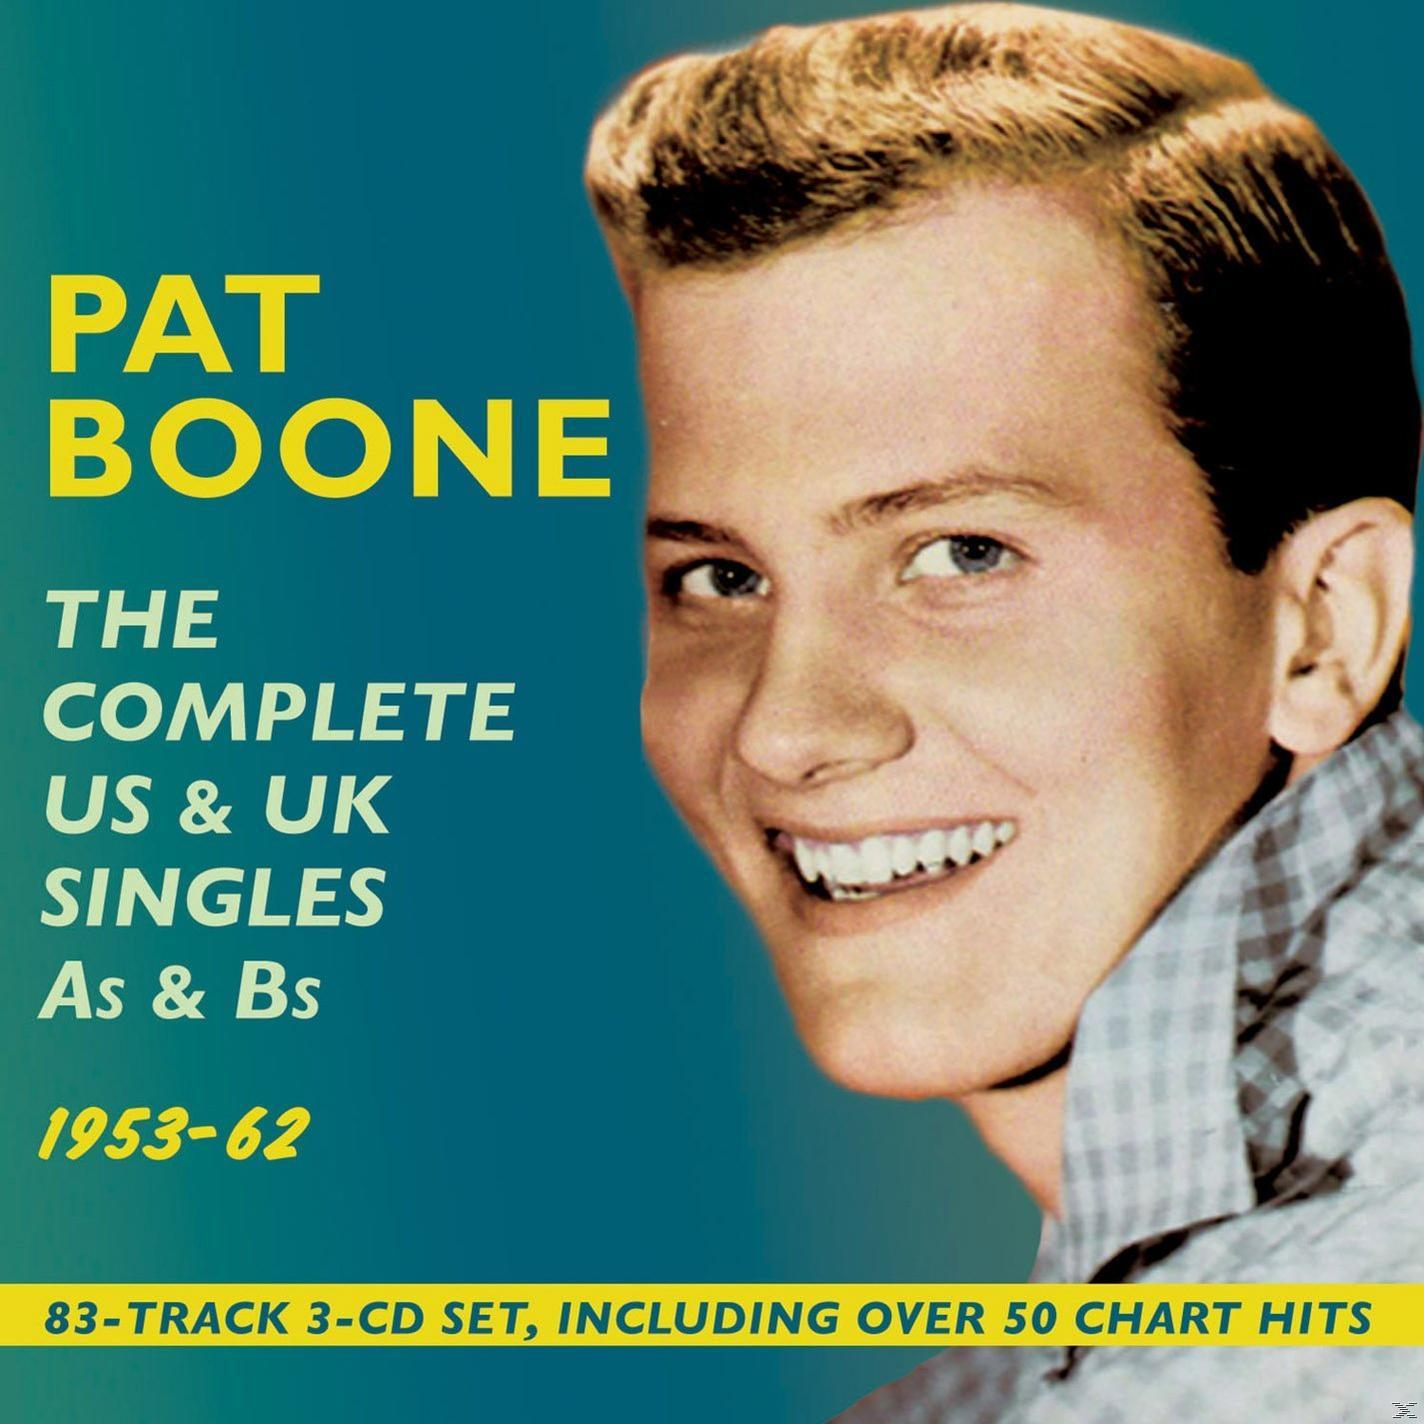 Complete Boone - Uk Pat & The Singles & Bs (CD) 1953-62 As Us -